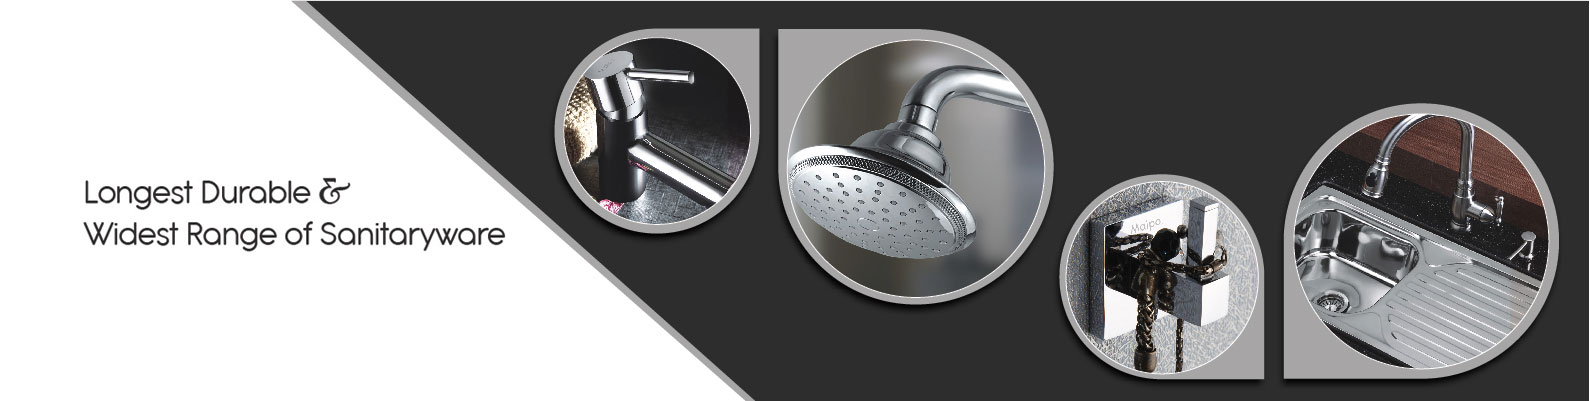 CP Bathroom Fitting Manufacturers